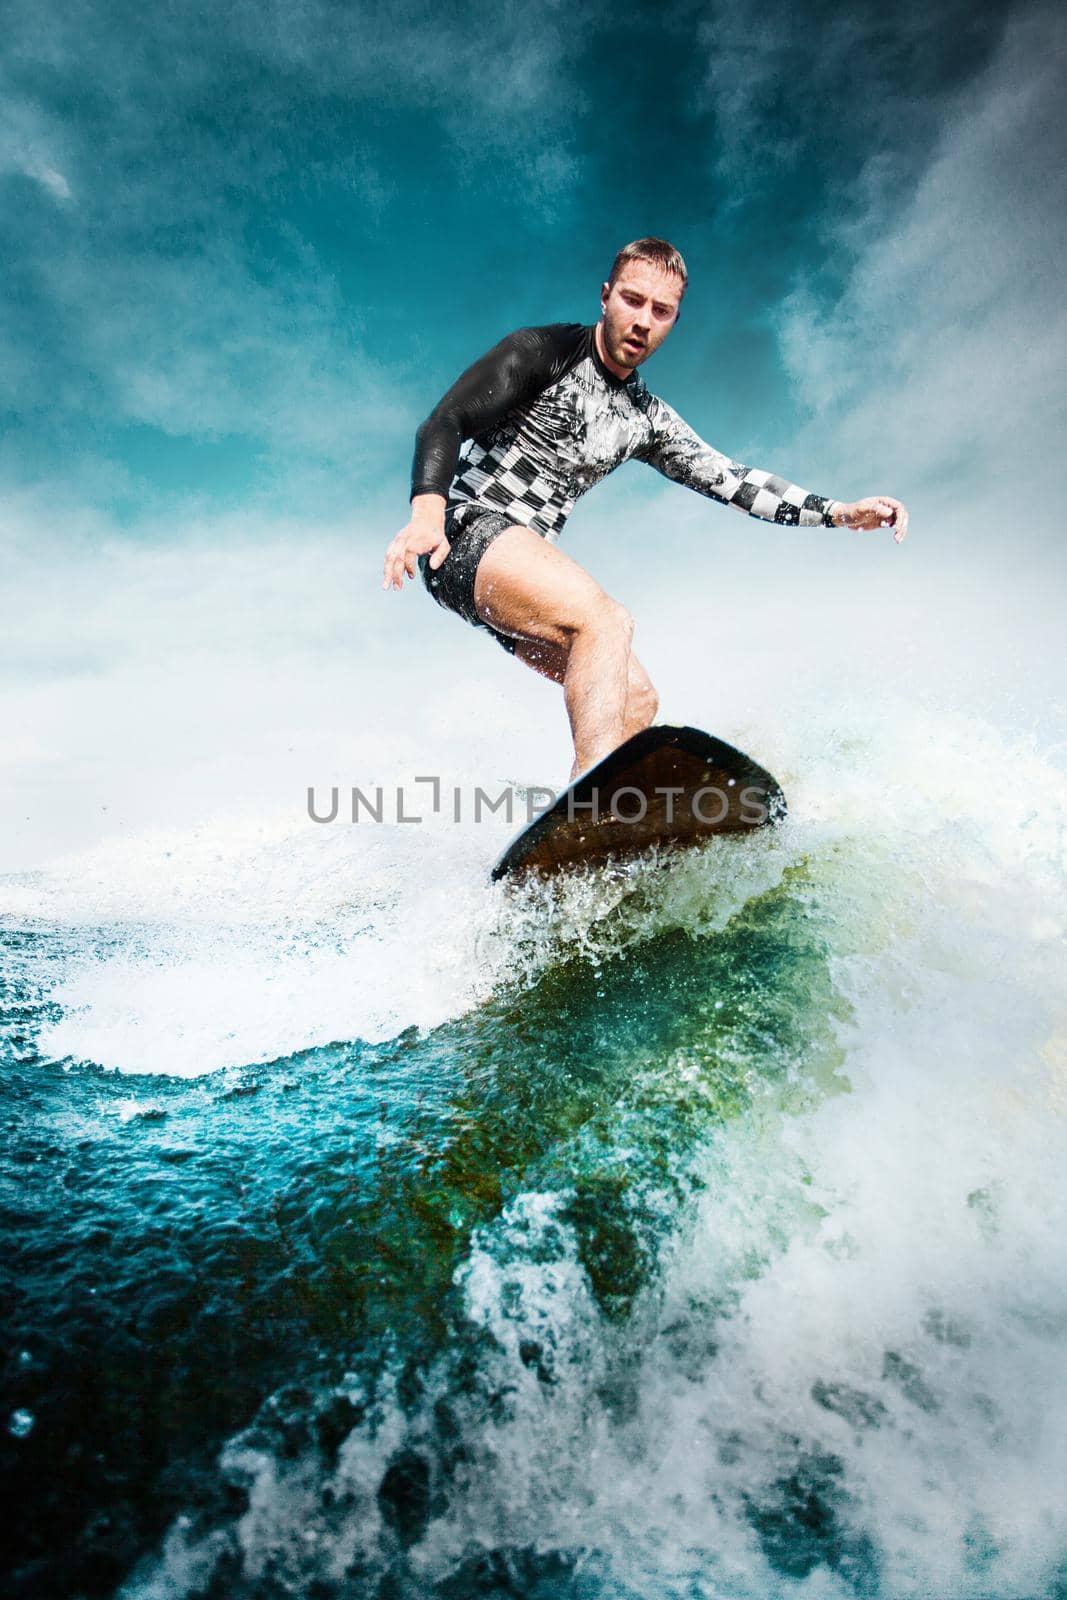 Surfing at blue sea. Young man balanced on wave on surfboard. Wake surf outdoor lifestyle.